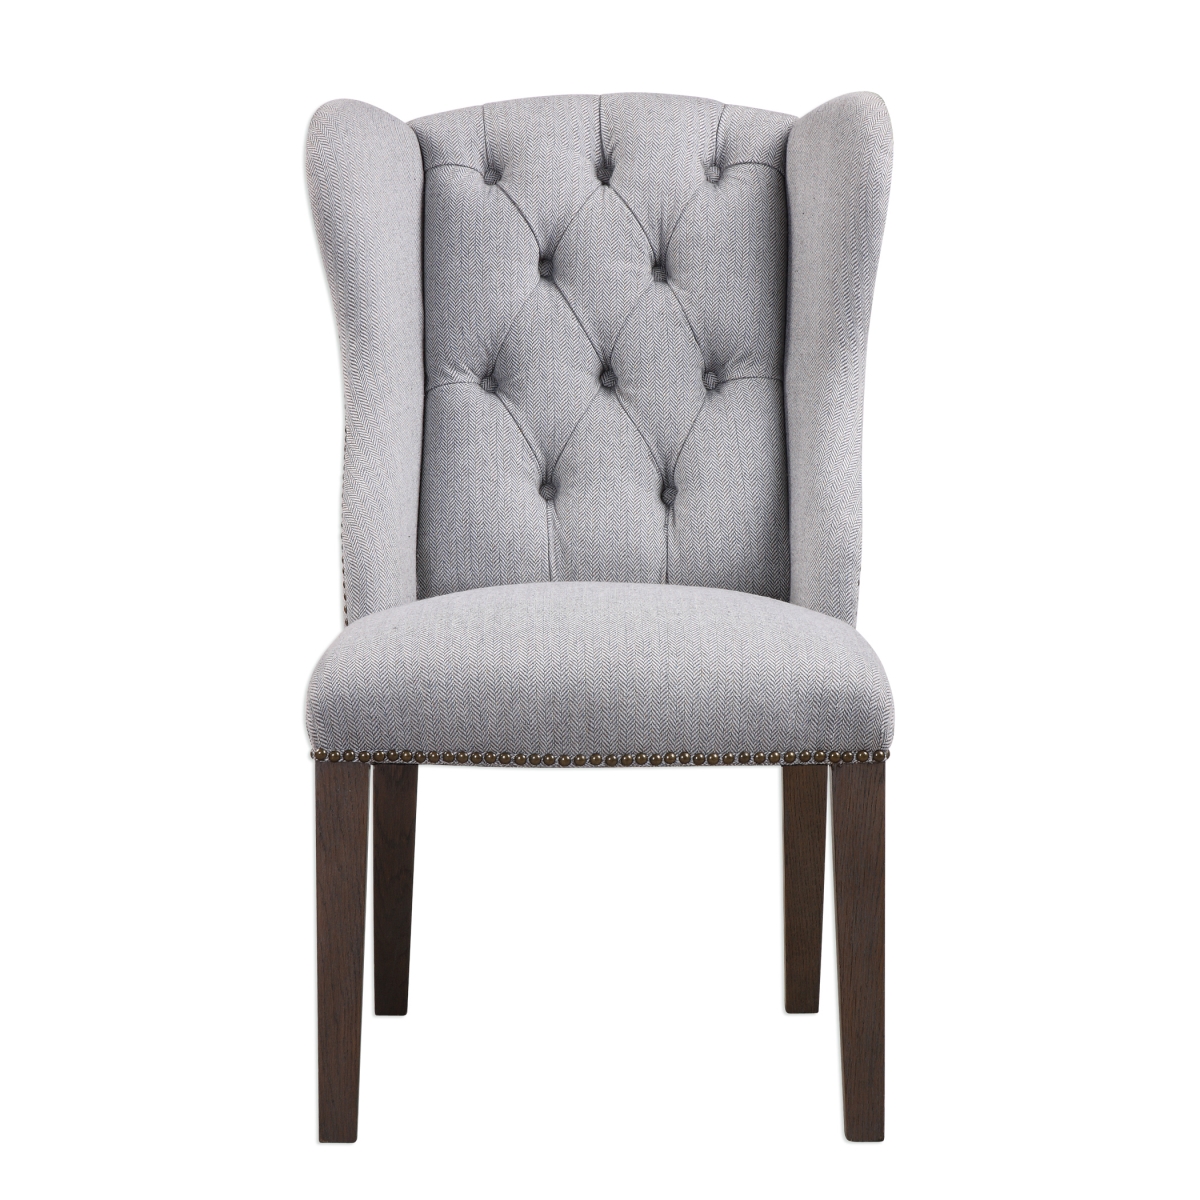 UPC 792977233825 product image for Uttermost 23382 Jonna Wingback Accent Chair | upcitemdb.com